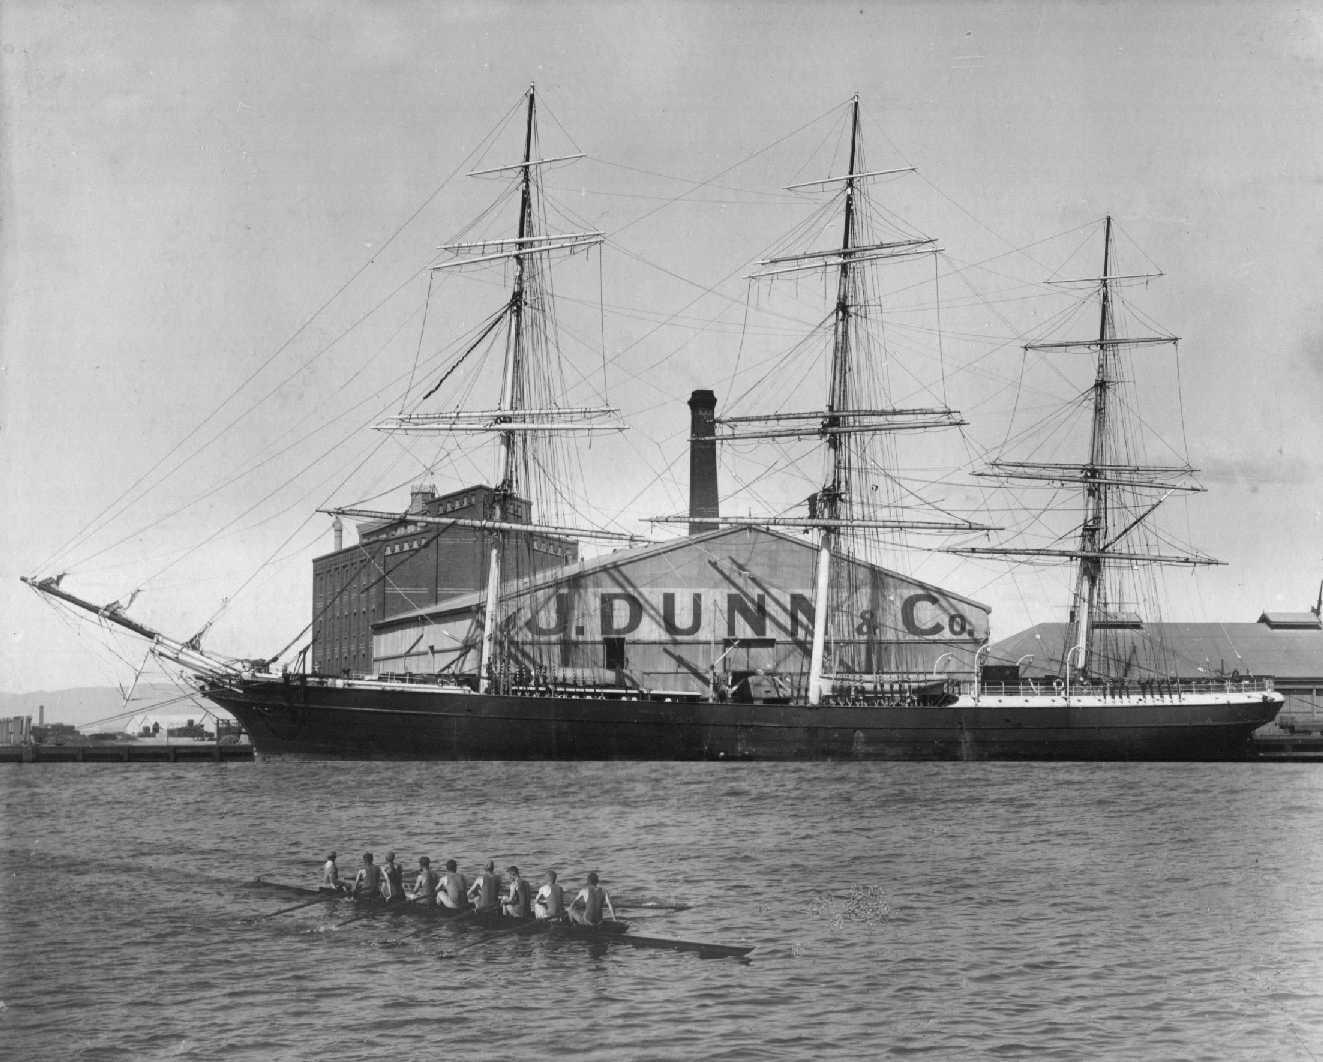 Built 1869 at Aberdeen by W. Hood & Co. Official No. 60696.  1,405 gross tons, length 221 feet x breadth 38 feet x depth 22 feet.  Moored in Port Adelaide, 1901.